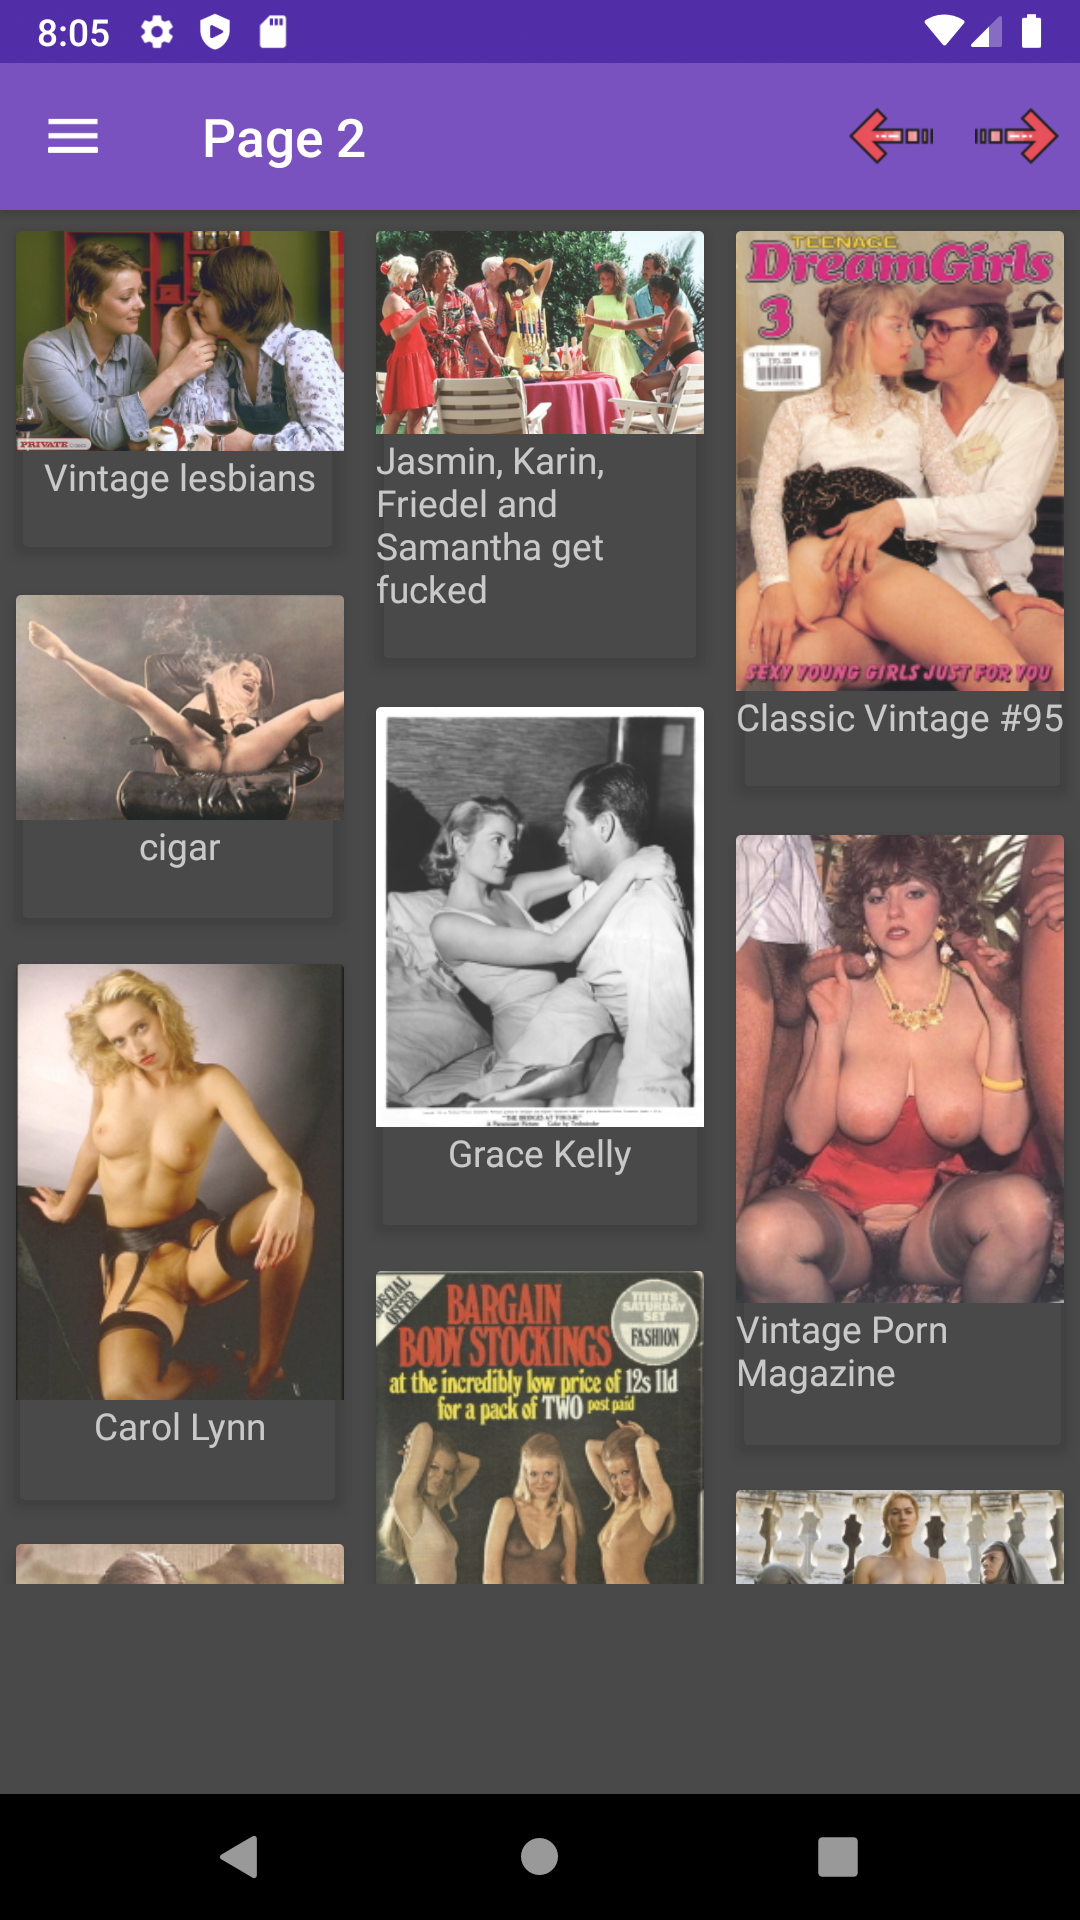 Vintage Porn hentai,images,free,download,porn,android,app,gallery,pics,pornstars,browser,hot,pornstar,apk,manga,wallpapers,sexy,anime,galleries,photos